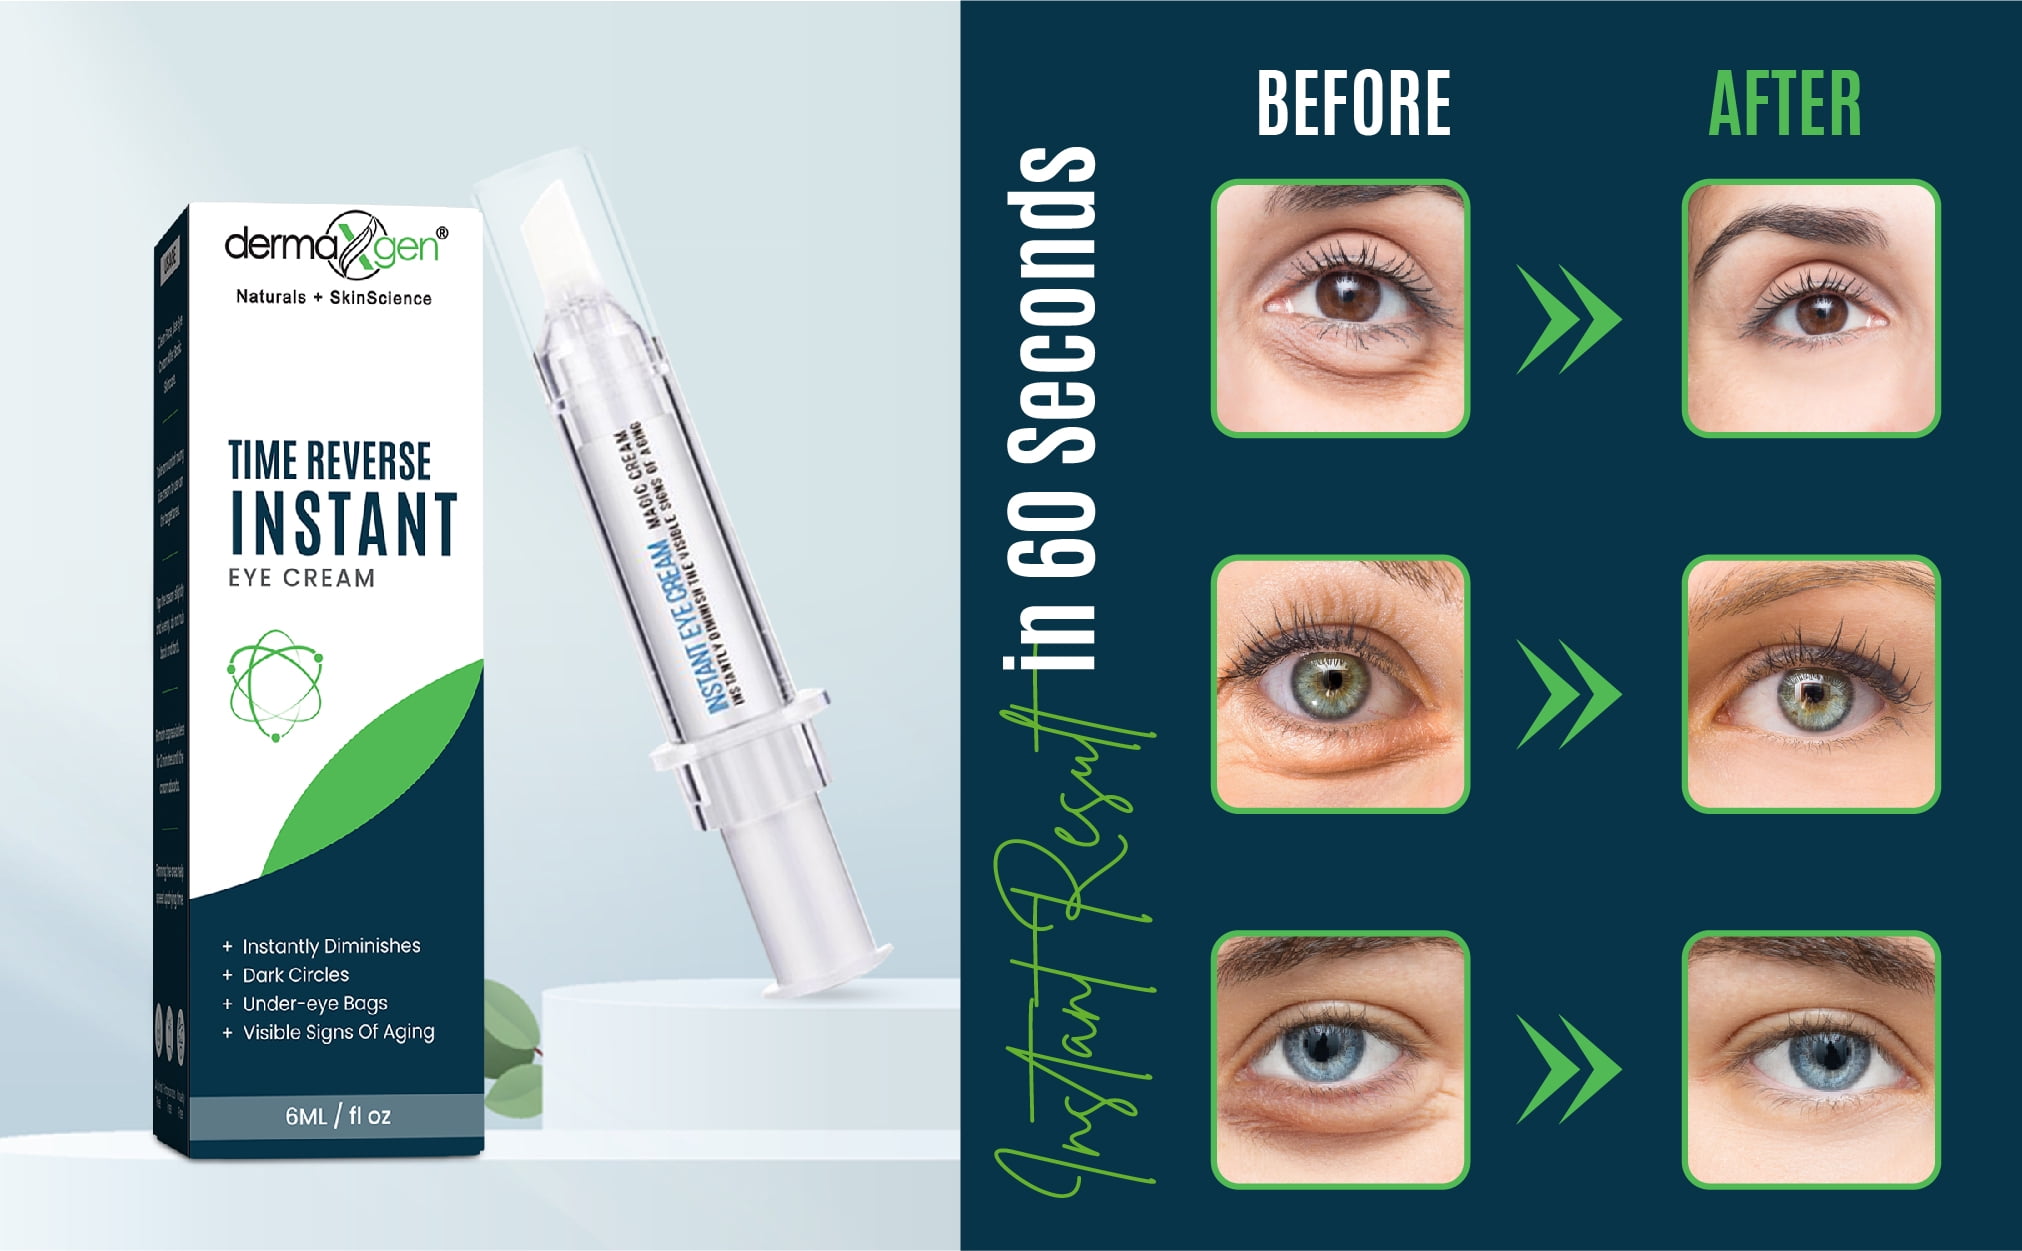 INSTANT EYEBAG REMOVER - TIME REVERSE- Visibly Reduce Under-Eye Bags, Wrinkles, Dark Circles, Fine Lines & Crow's Feet Instantly